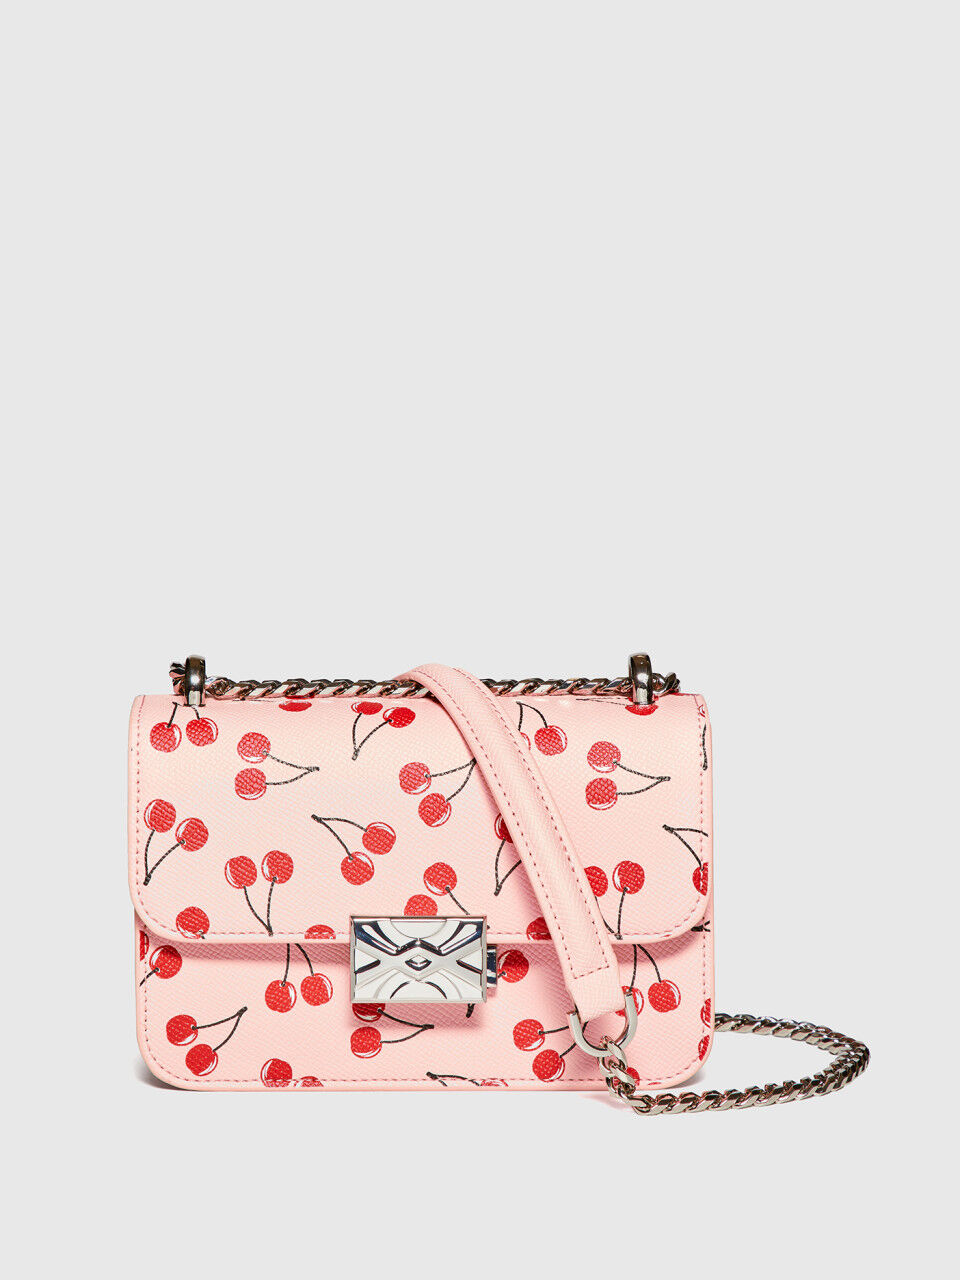 Small pink Be Bag with cherries